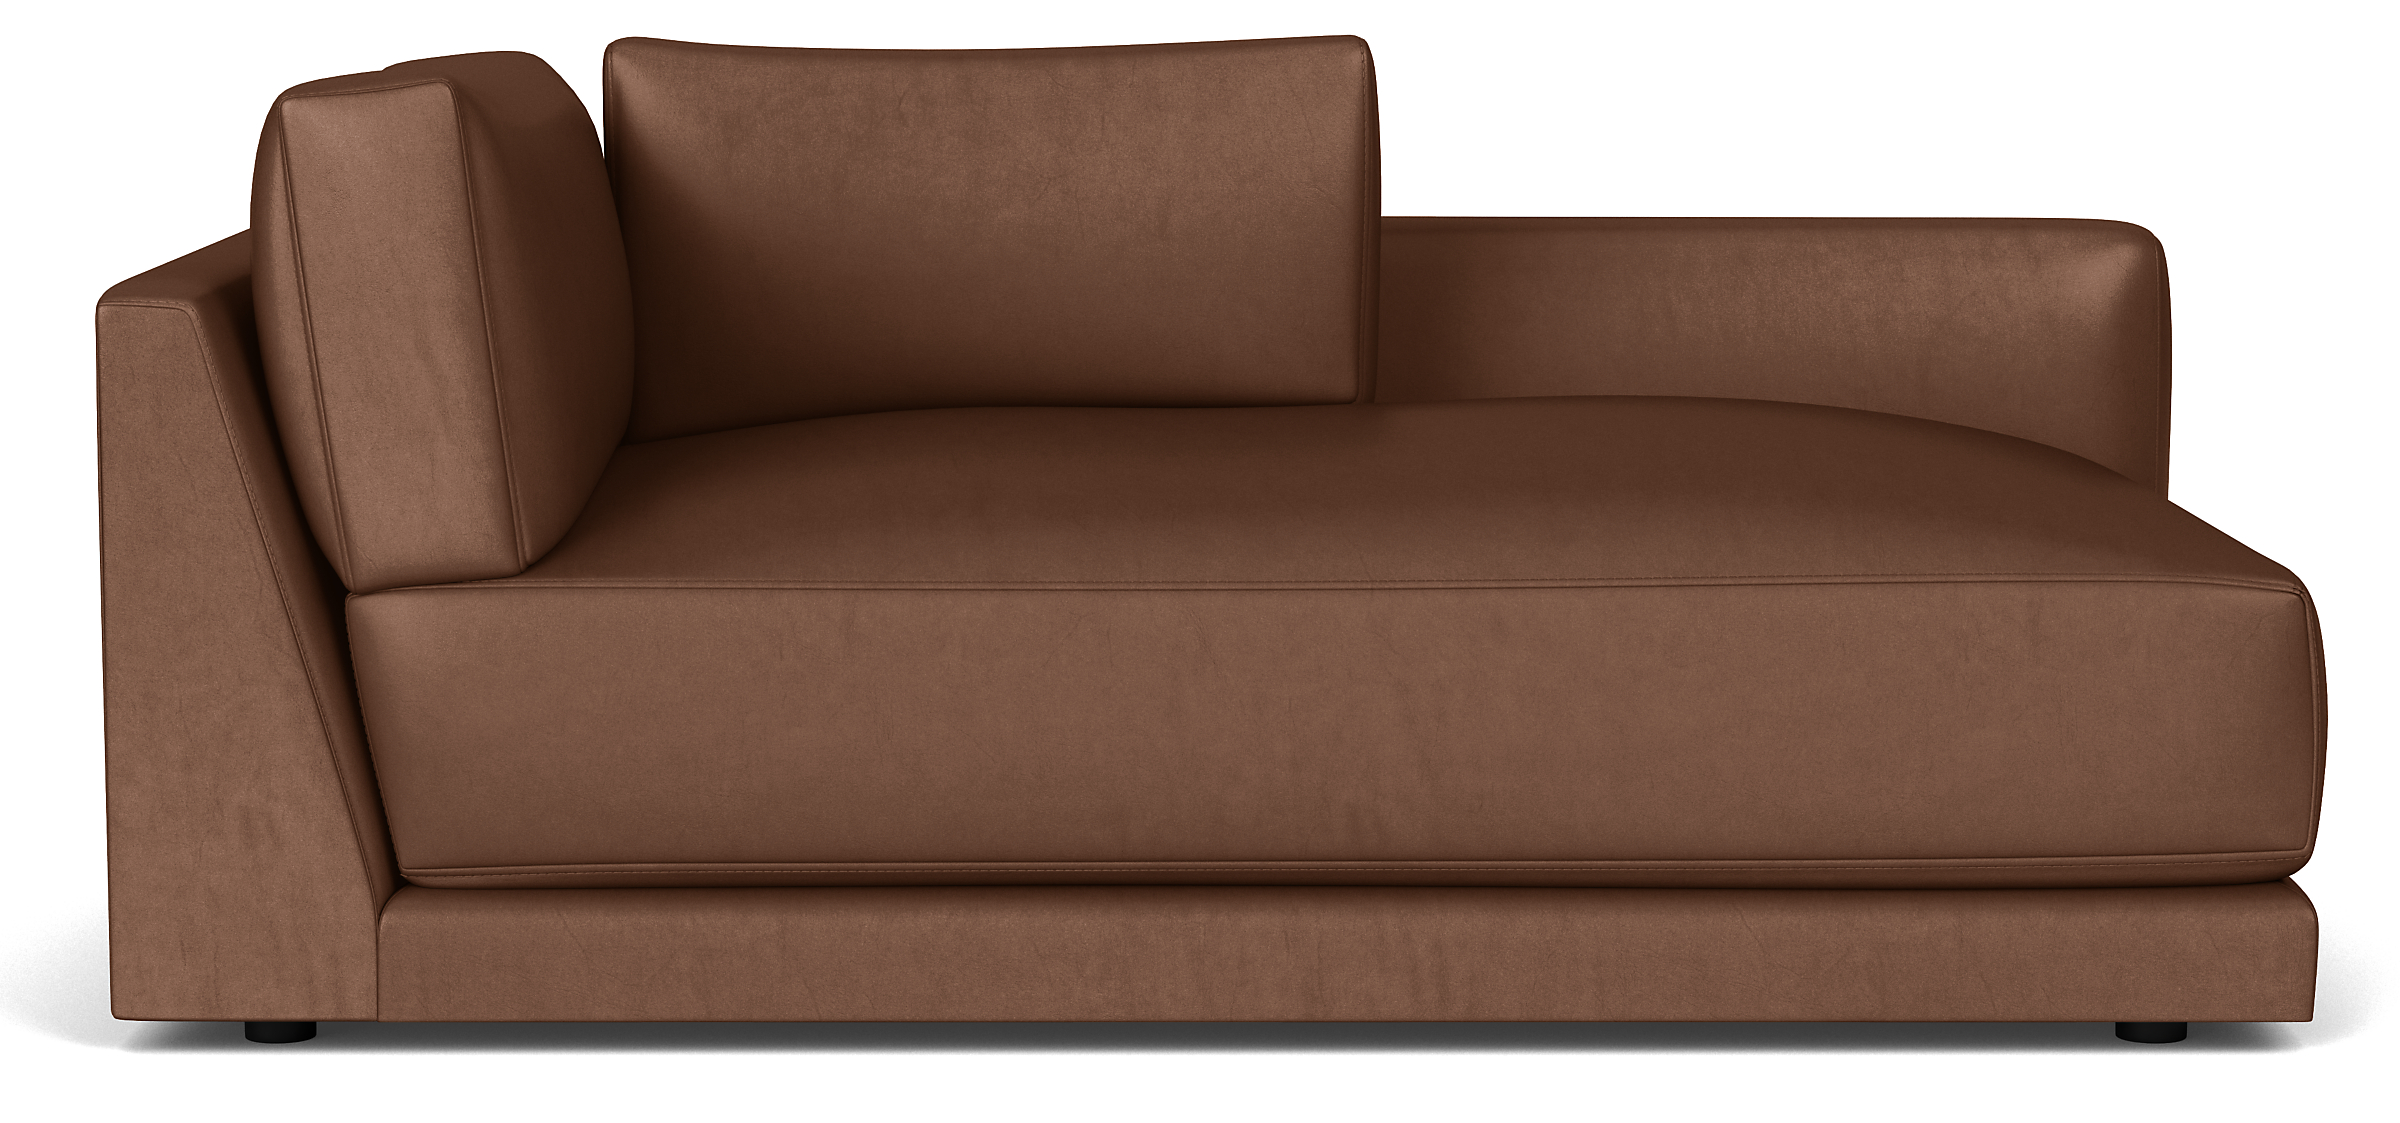 Clemens Leather Chaise